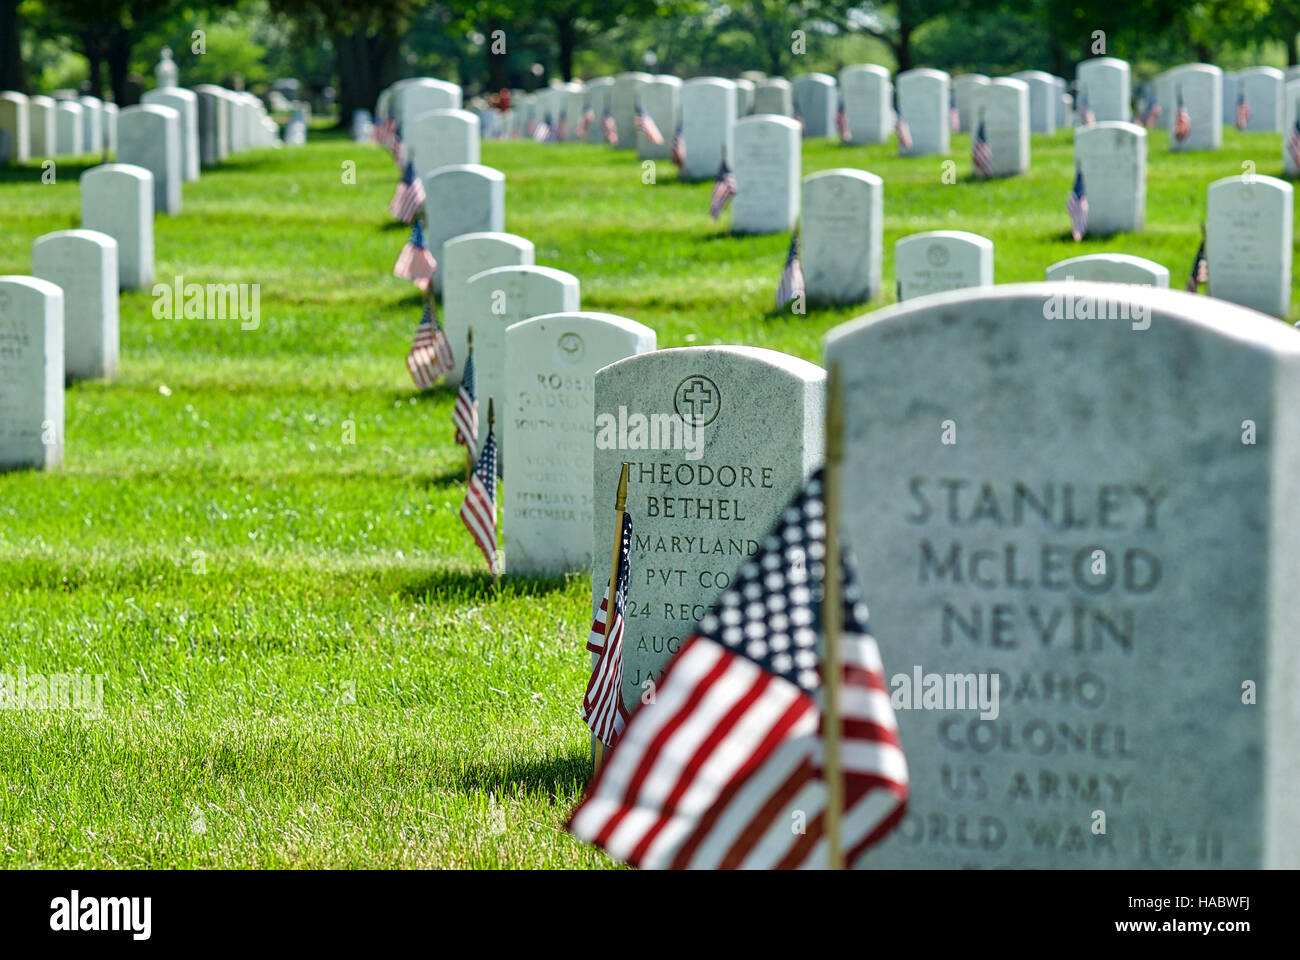 Numerous gravestones with American flags at Arlington National Cemetery, Virginia, USA, on Memorial Day weekend. Stock Photo